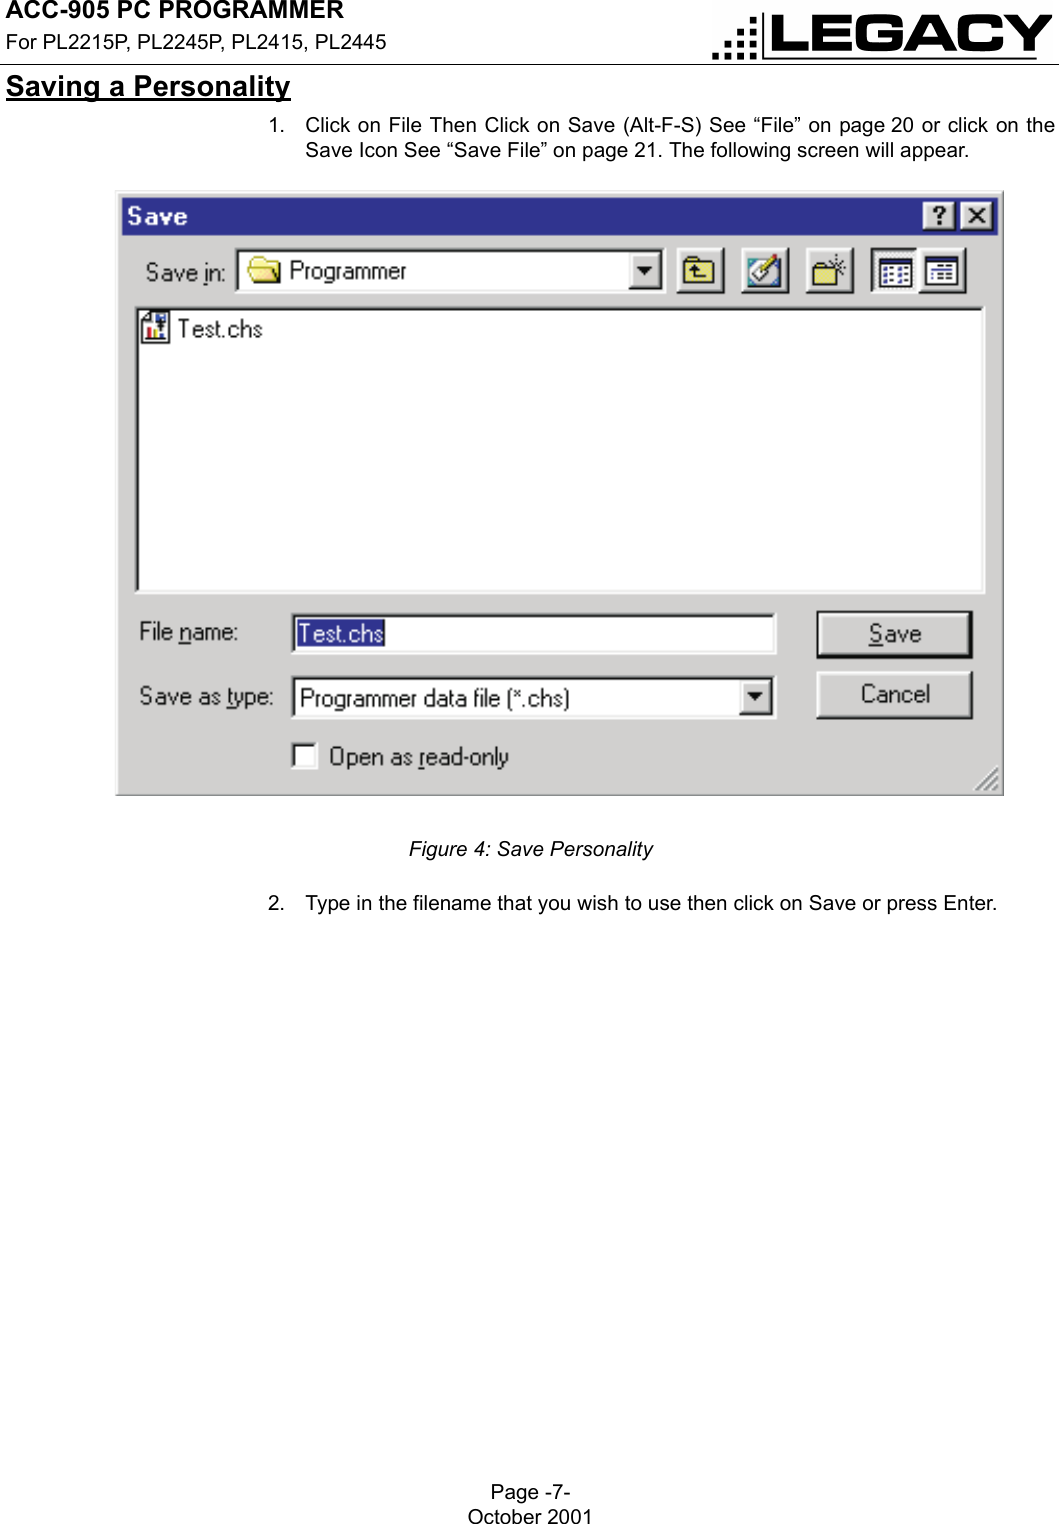 ACC-905 PC PROGRAMMERFor PL2215P, PL2245P, PL2415, PL2445Page -7-October 2001GETTING STARTEDSaving a Personality1. Click on File Then Click on Save (Alt-F-S) See “File” on page 20 or click on theSave Icon See “Save File” on page 21. The following screen will appear.Figure 4: Save Personality2. Type in the filename that you wish to use then click on Save or press Enter.